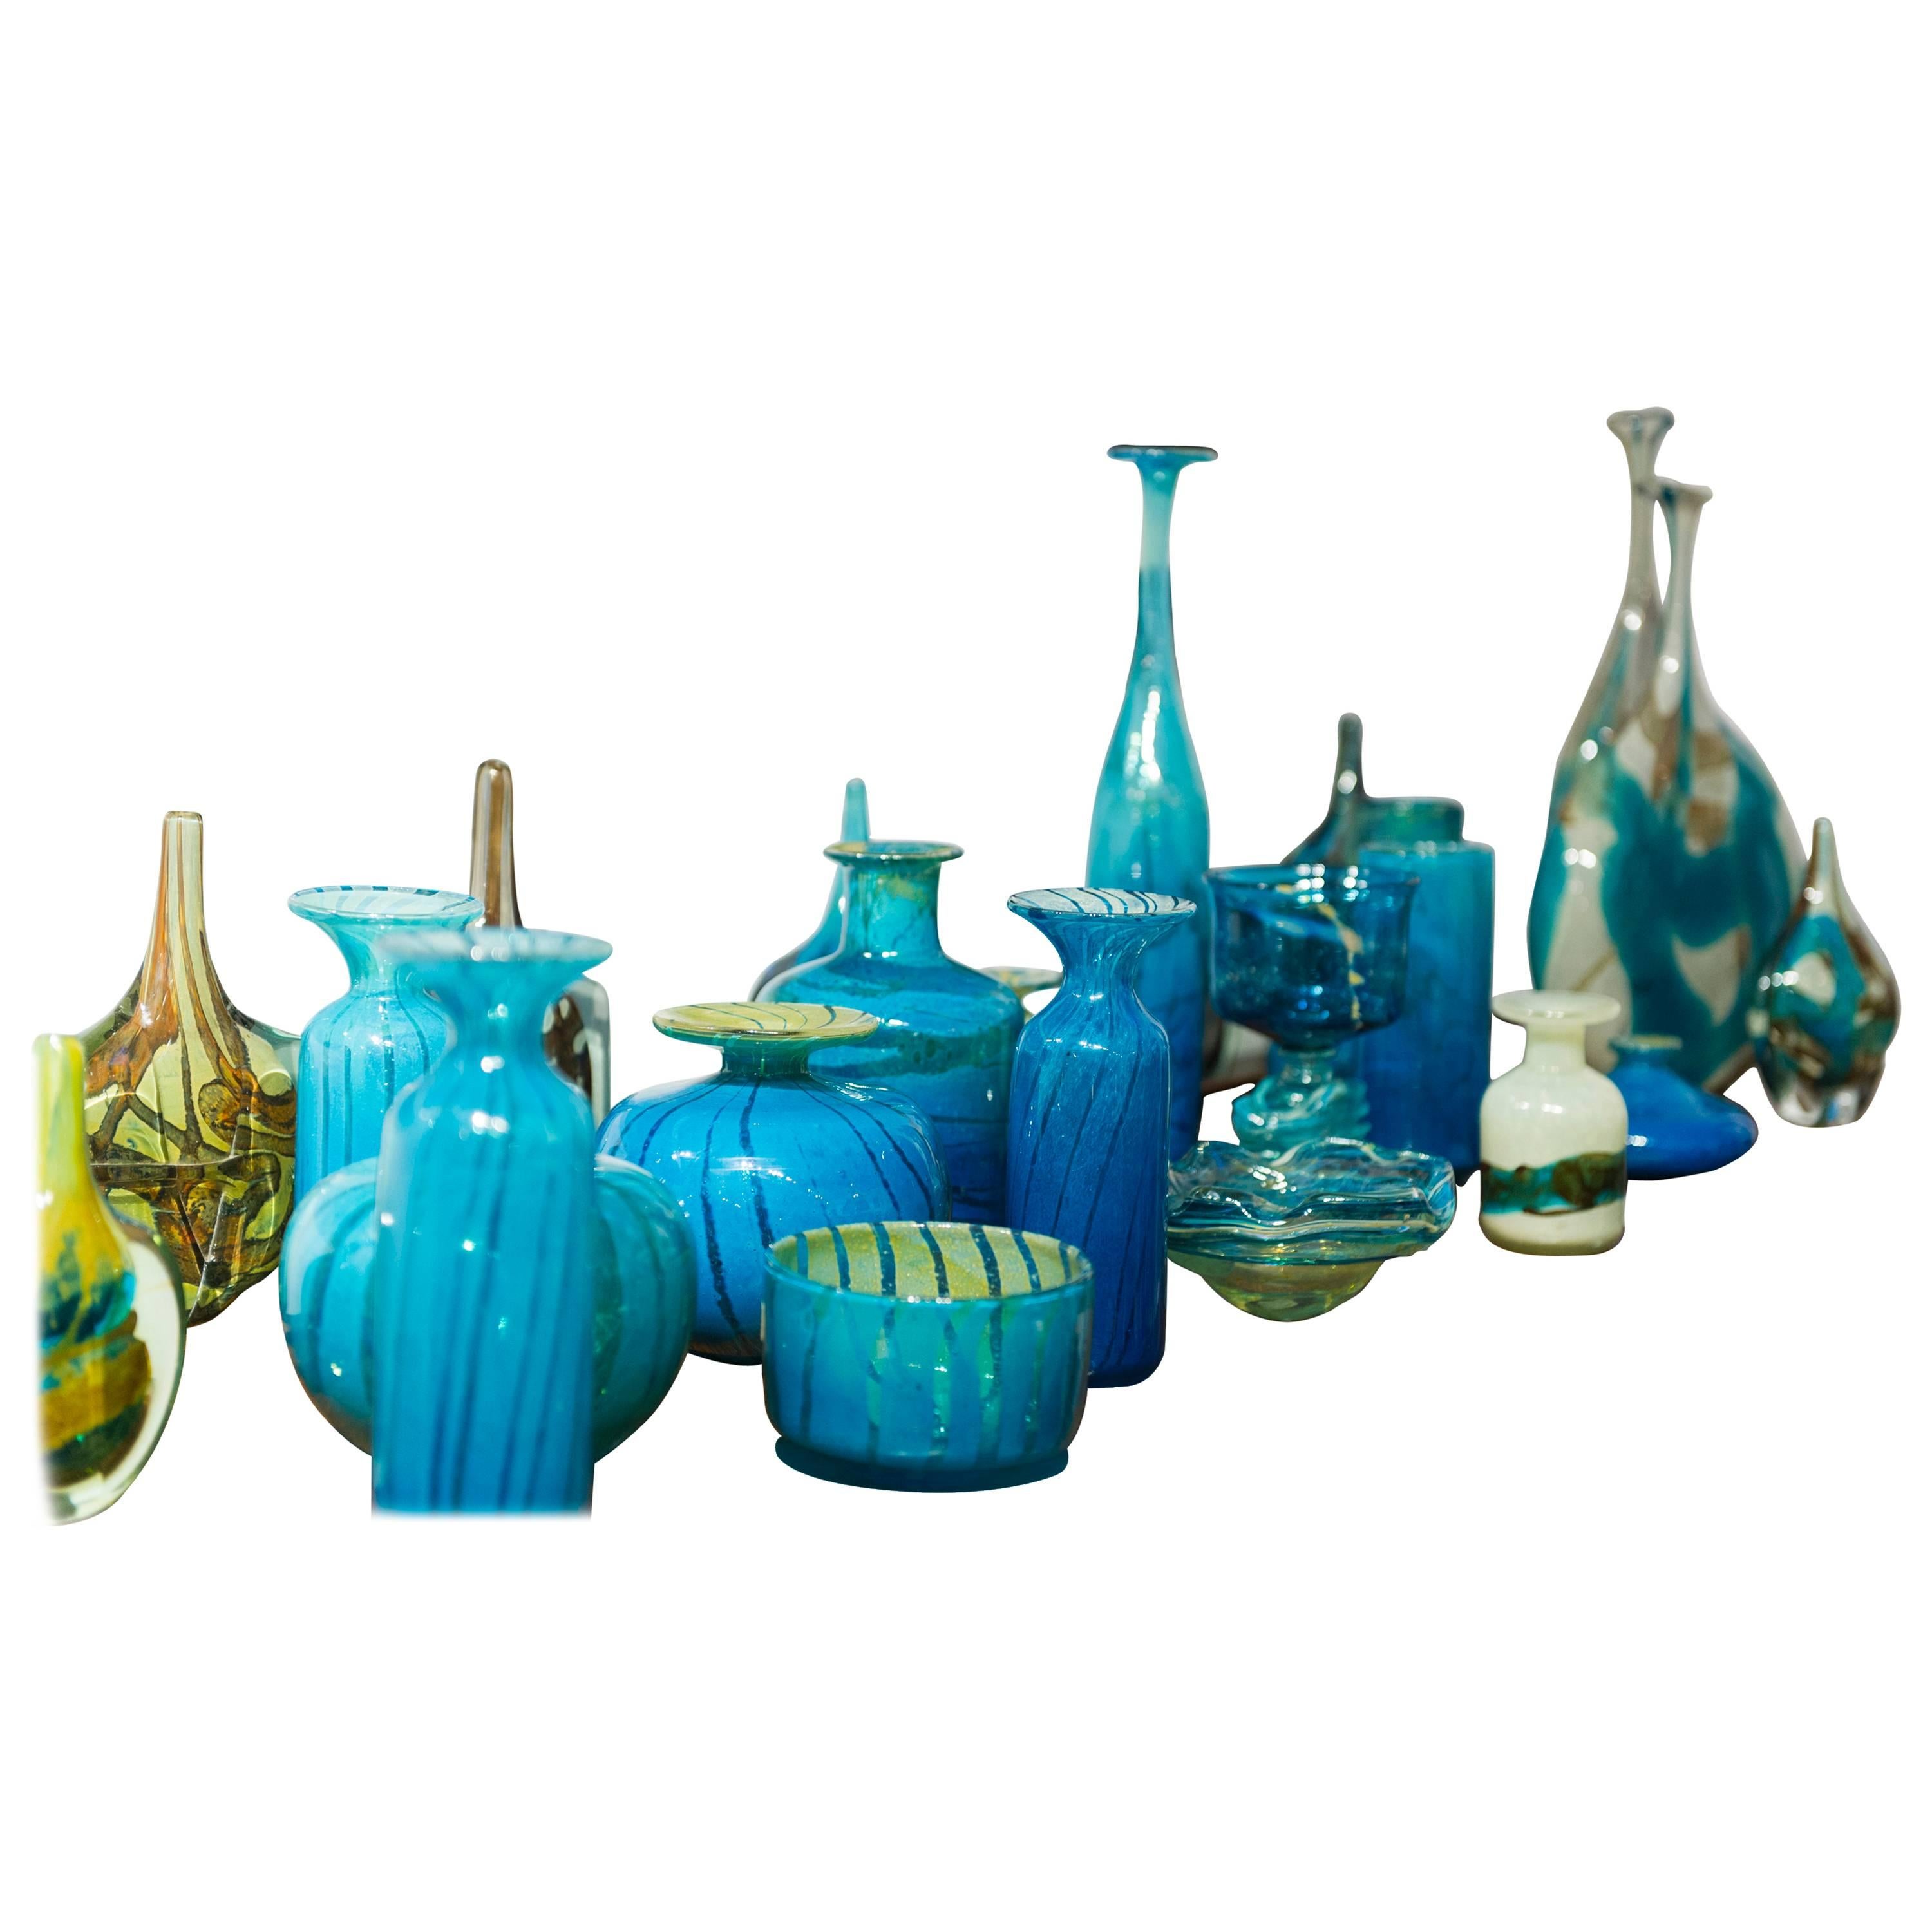 Vases in Strong Blue and Green Mediterranean Accent Colors